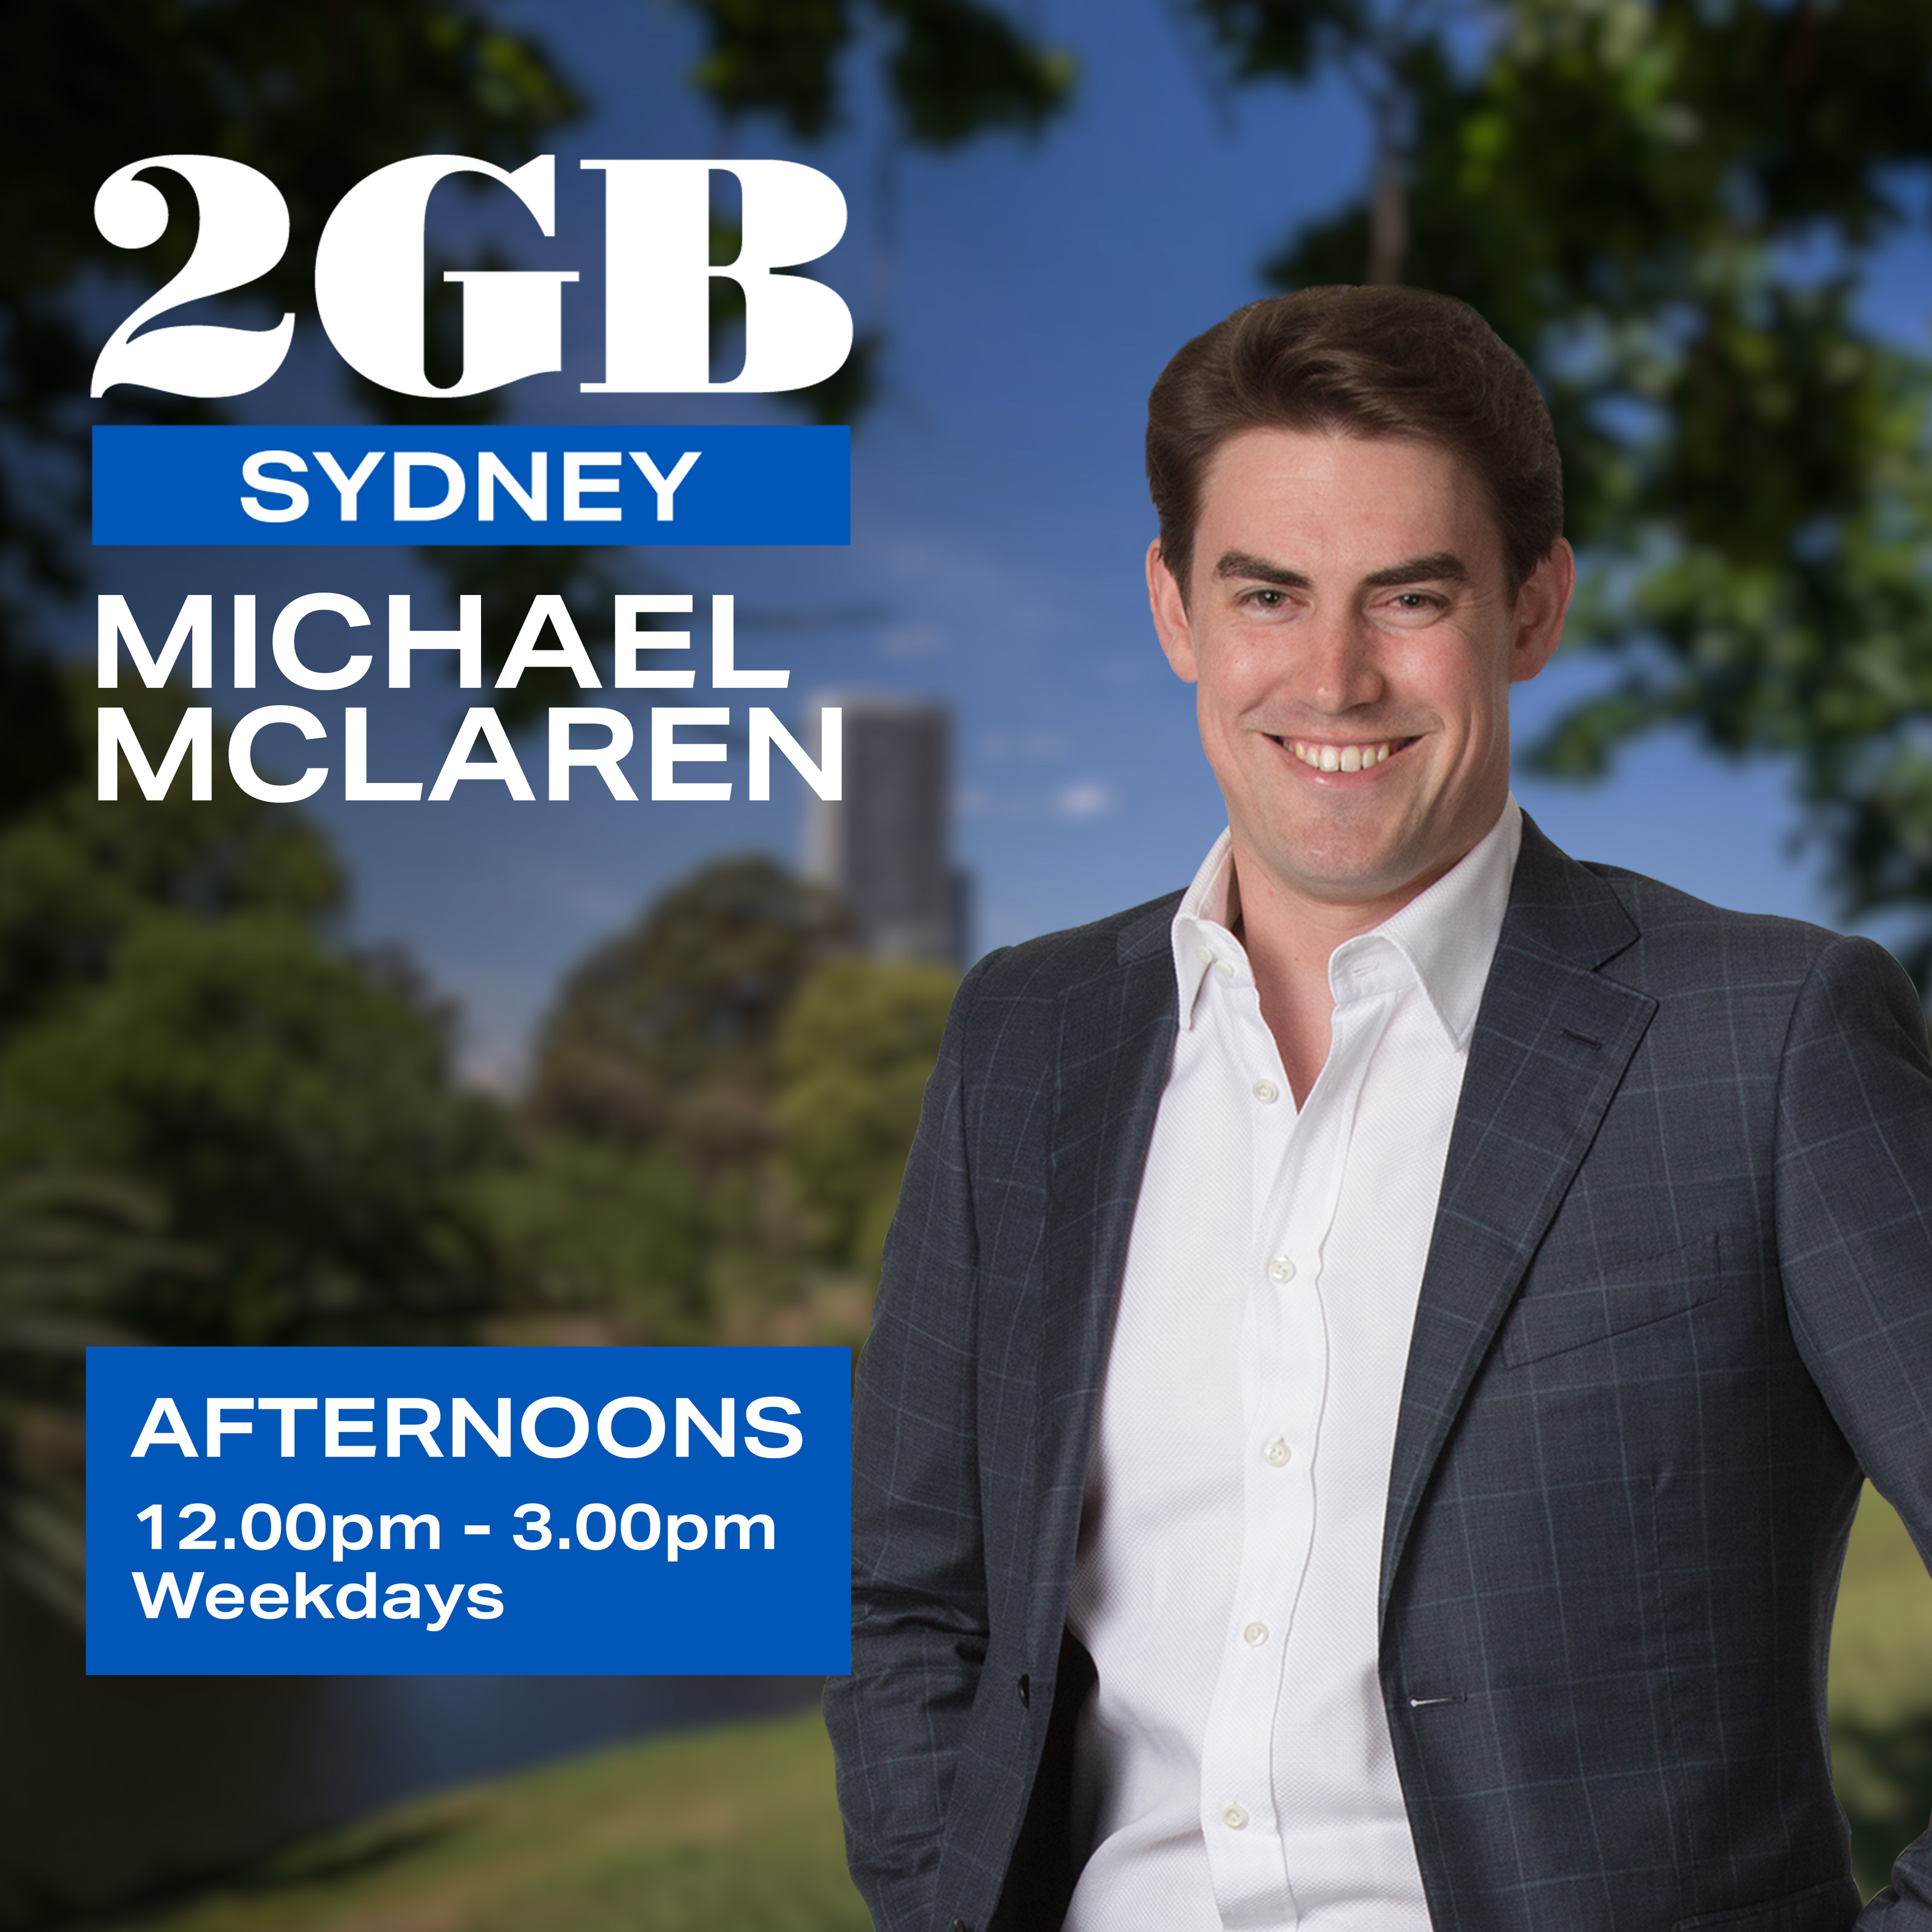 Afternoons with Michael McLaren - Thursday, 25th April